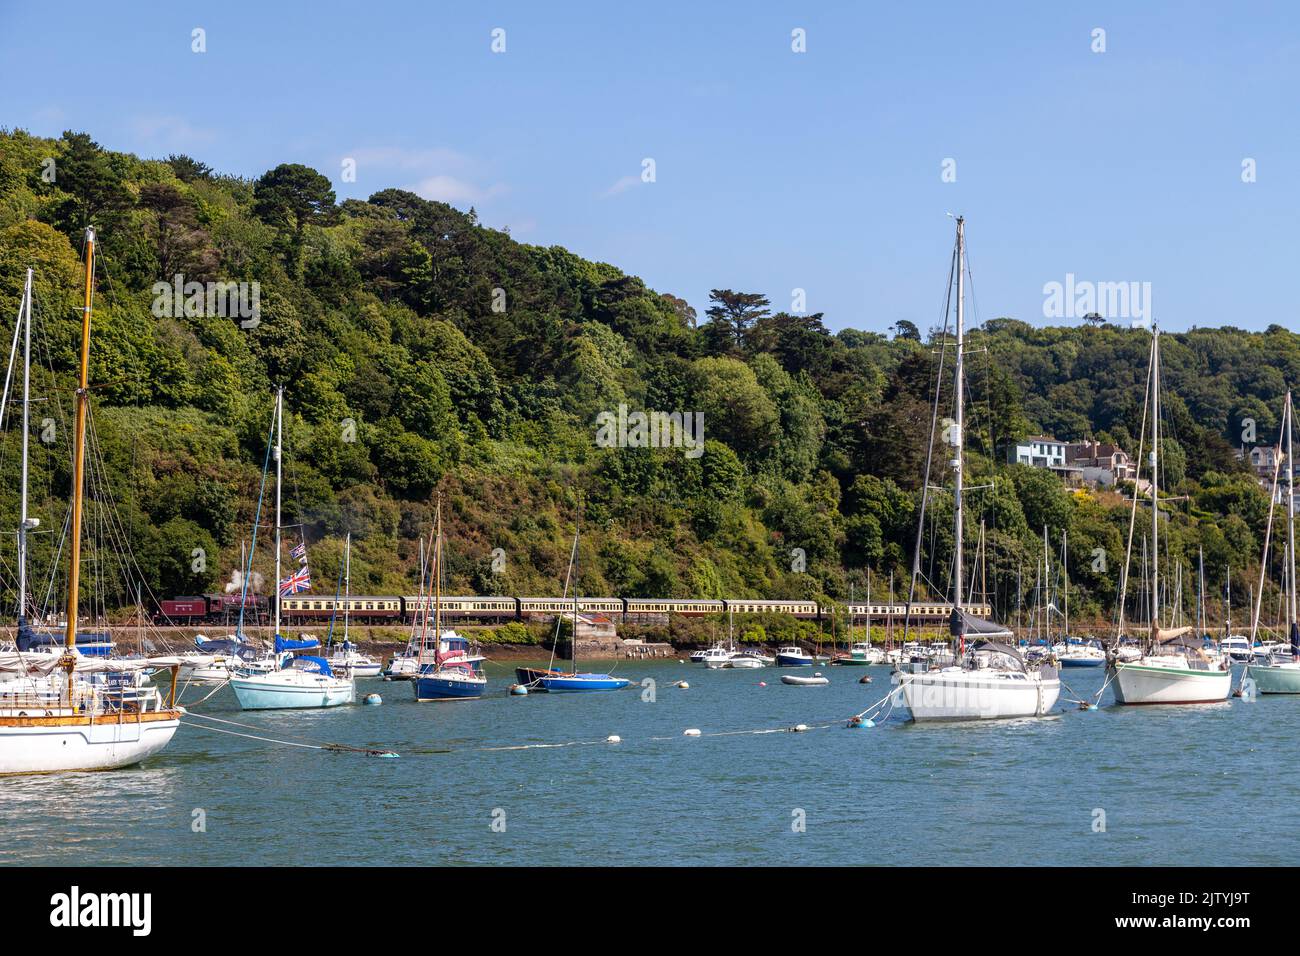 Dartmouth heritage railway line with a steam train running along the River dart with Yachts moored in the foreground. Stock Photo